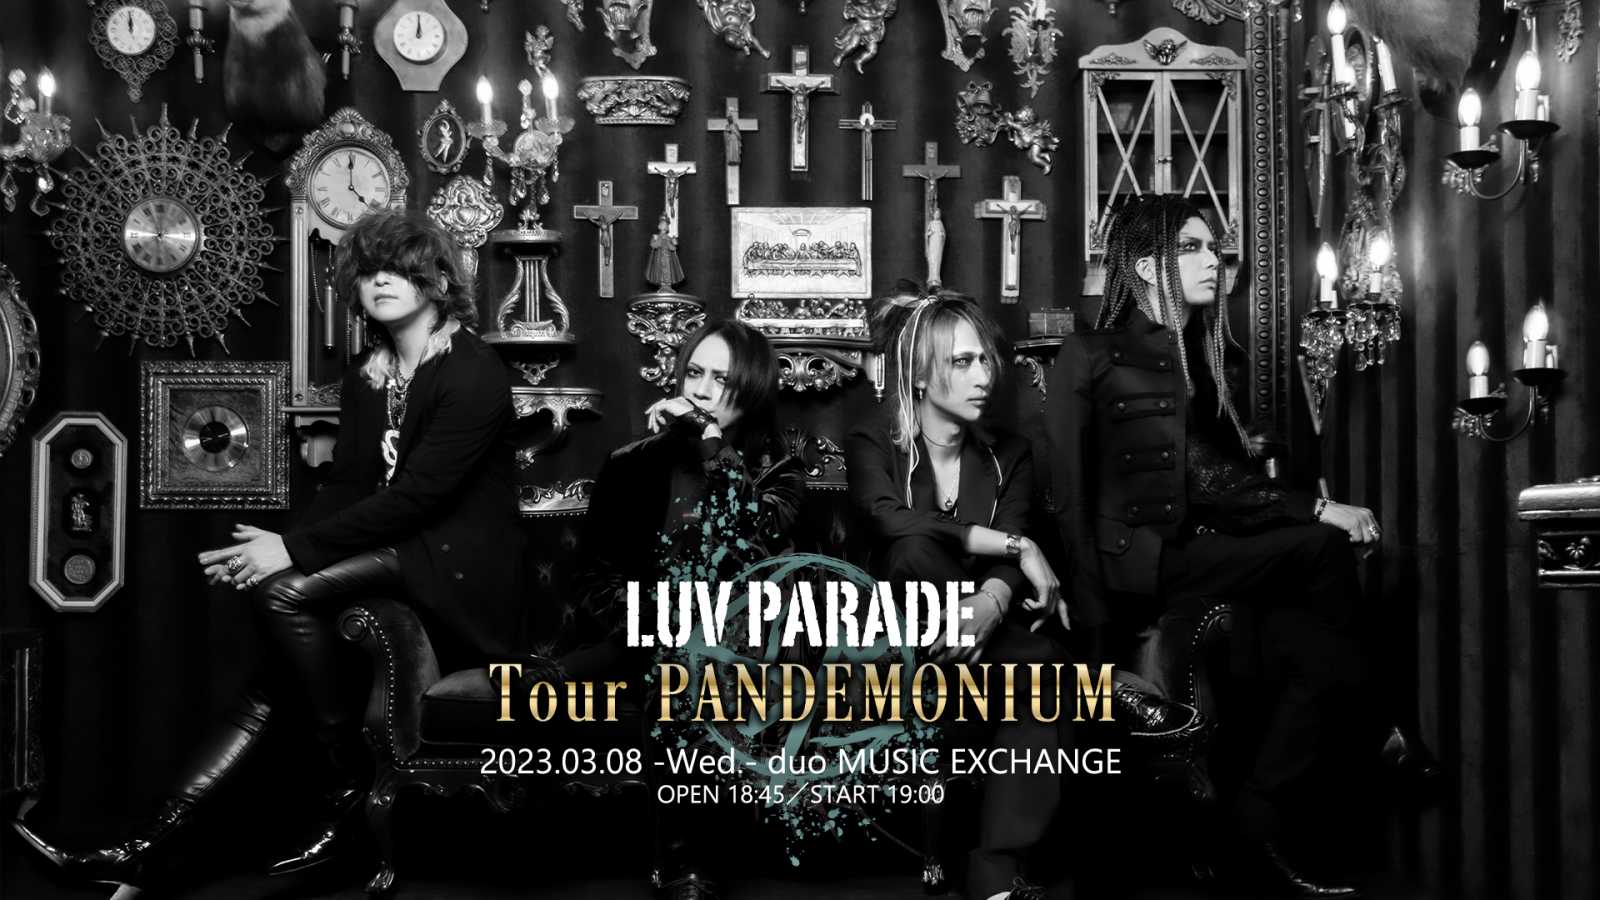 Luv PARADE to Live Stream "Tour PANDEMONIUM" Final © Luv PARADE. All rights reserved.